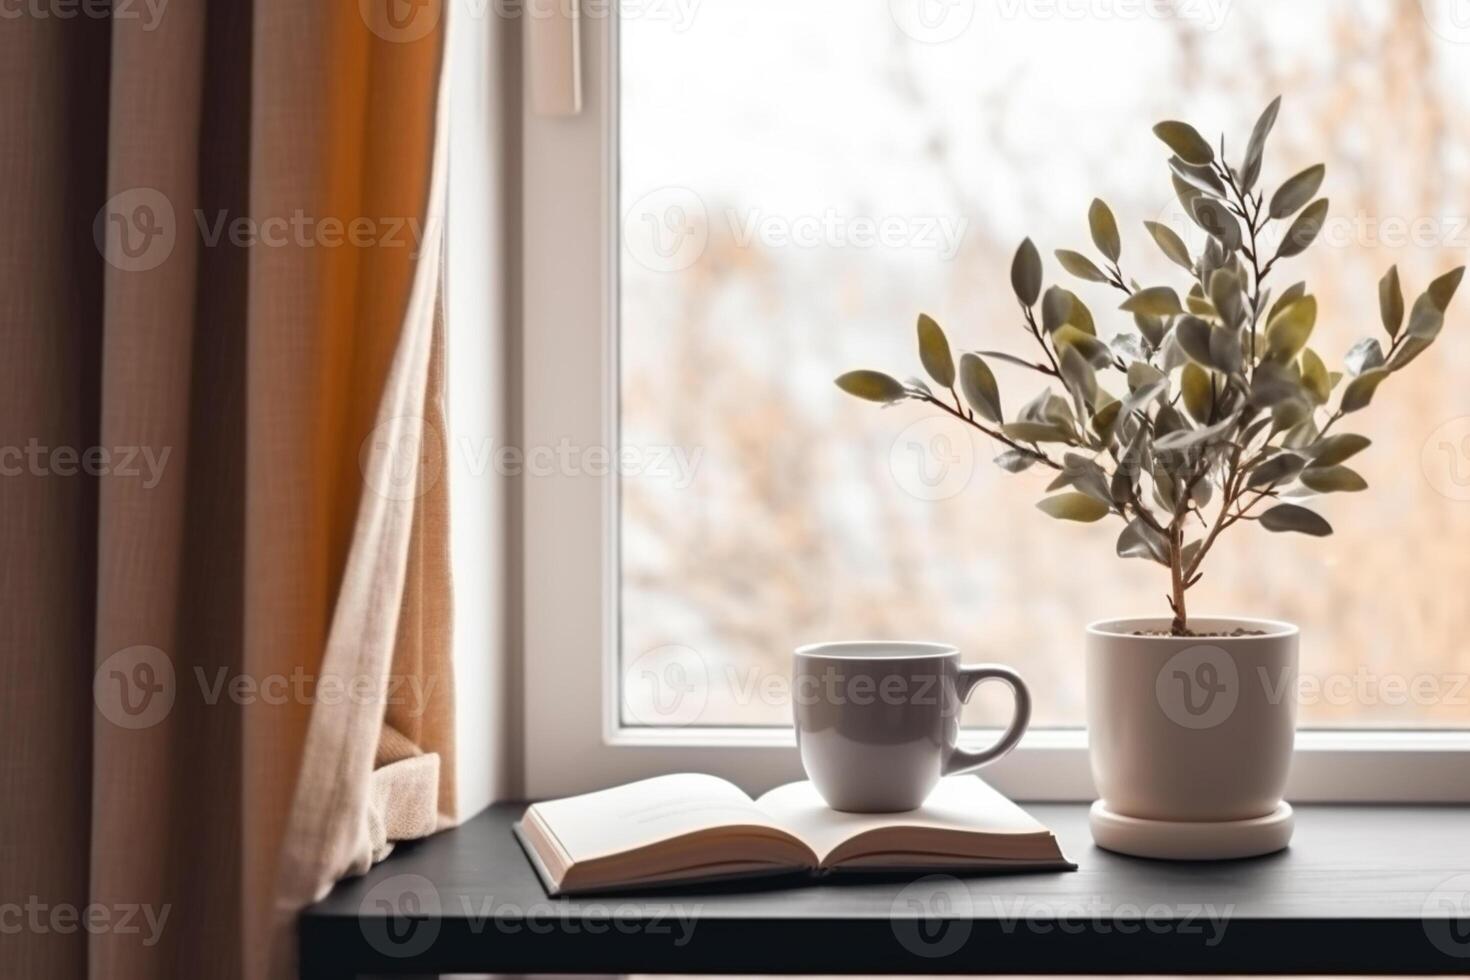 Breakfast still life. Cup of coffee, books and blank photo frame mockup on wooden table